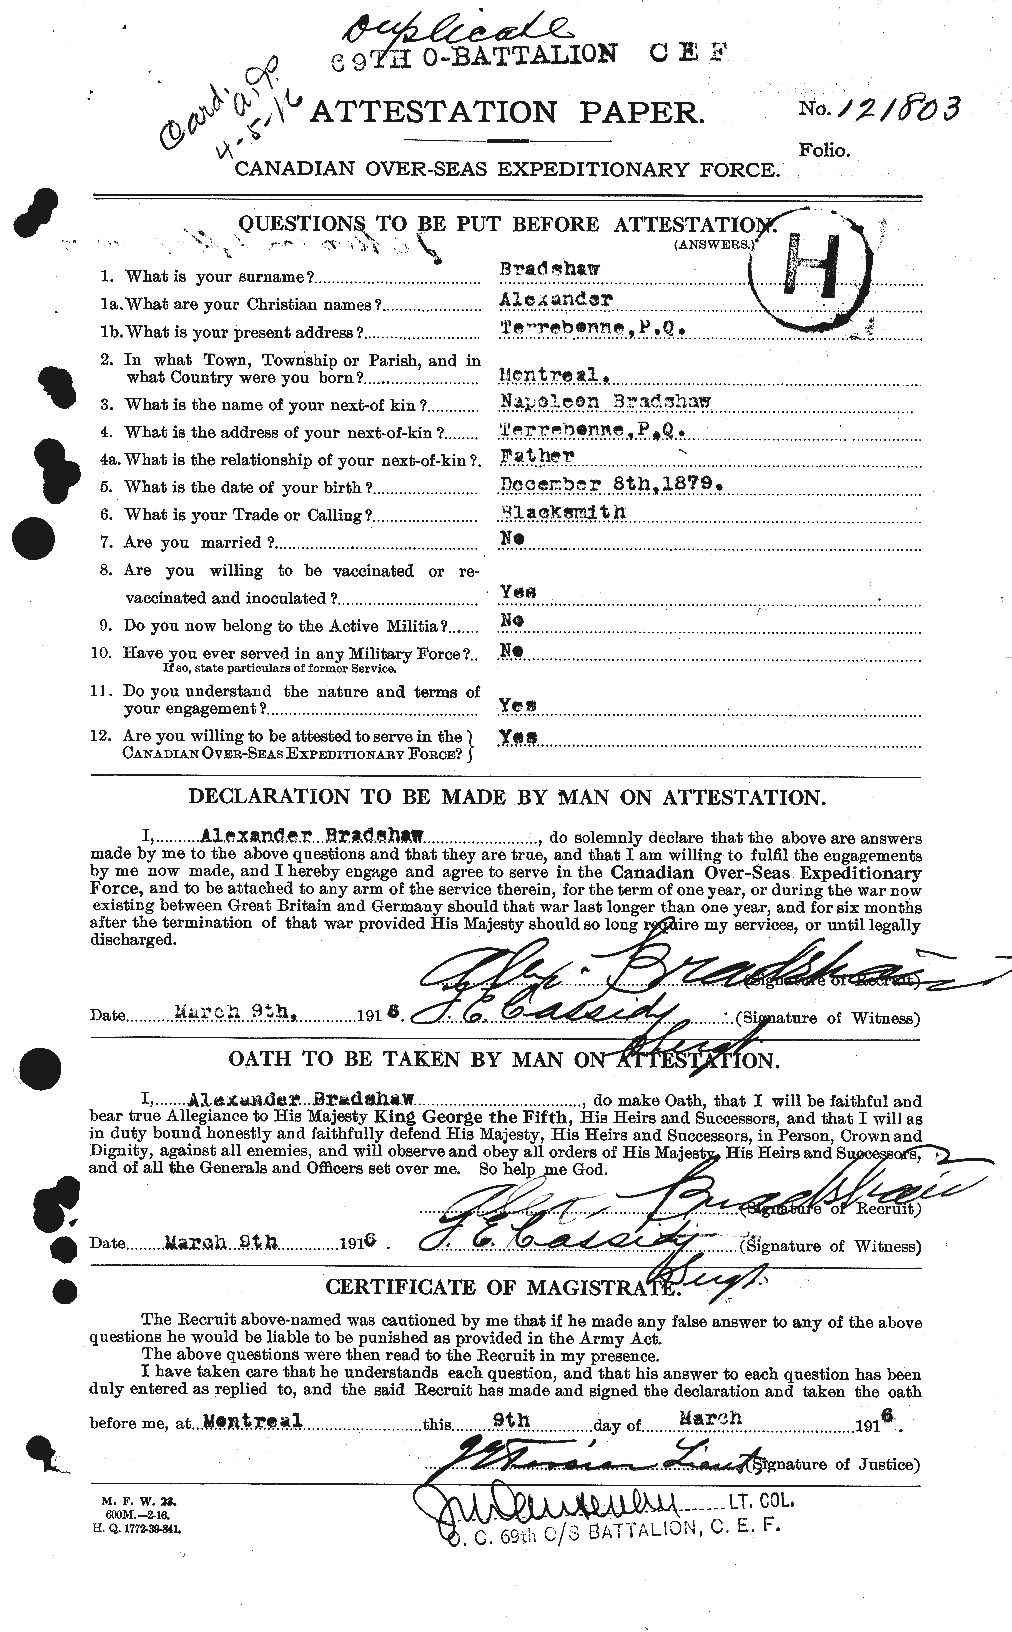 Personnel Records of the First World War - CEF 256583a